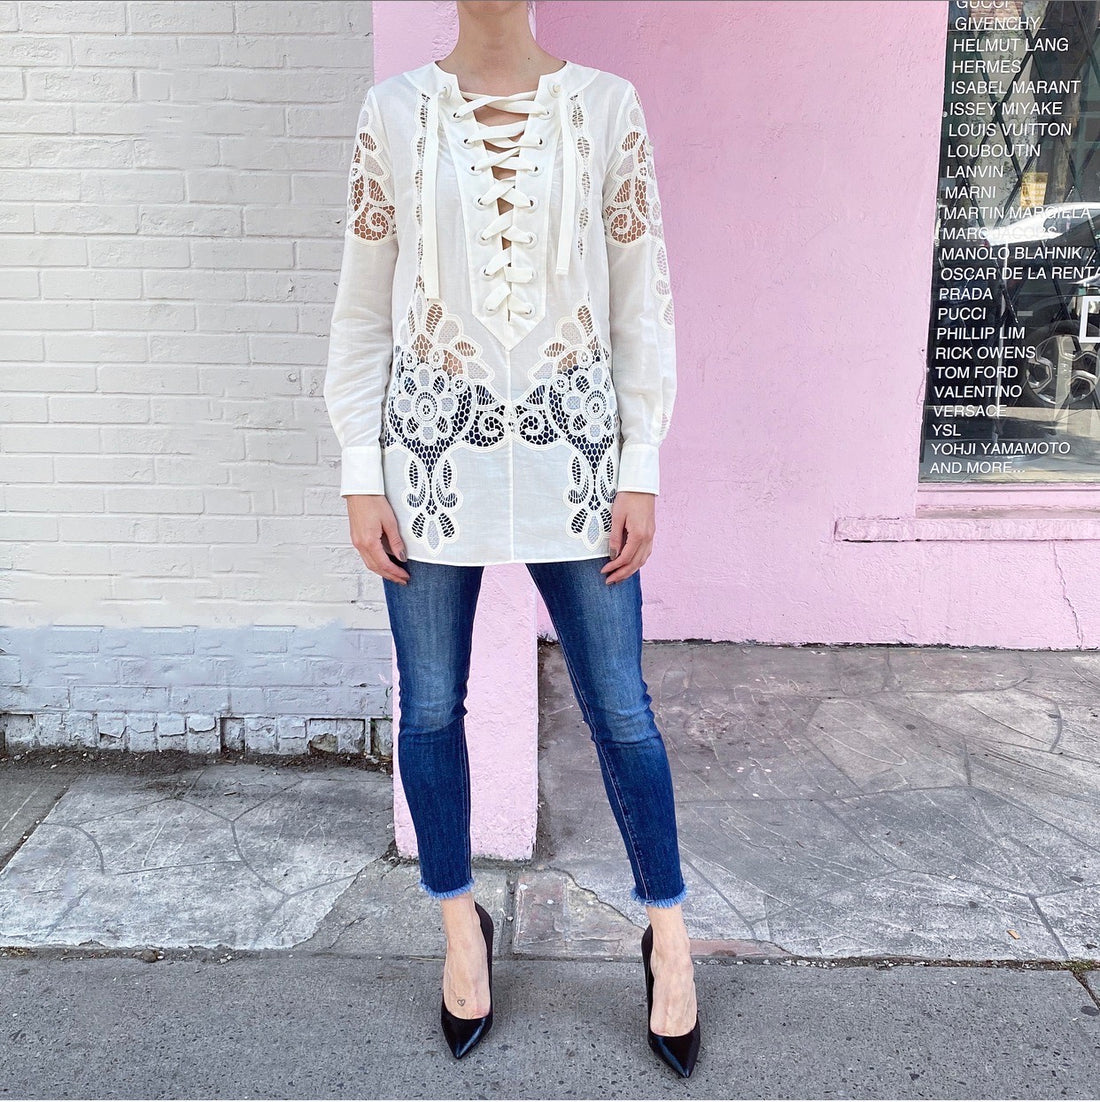 Gucci Resort Ivory Cotton Lace Up Broderie Anglaise Tunic Top - IT42 / US 6